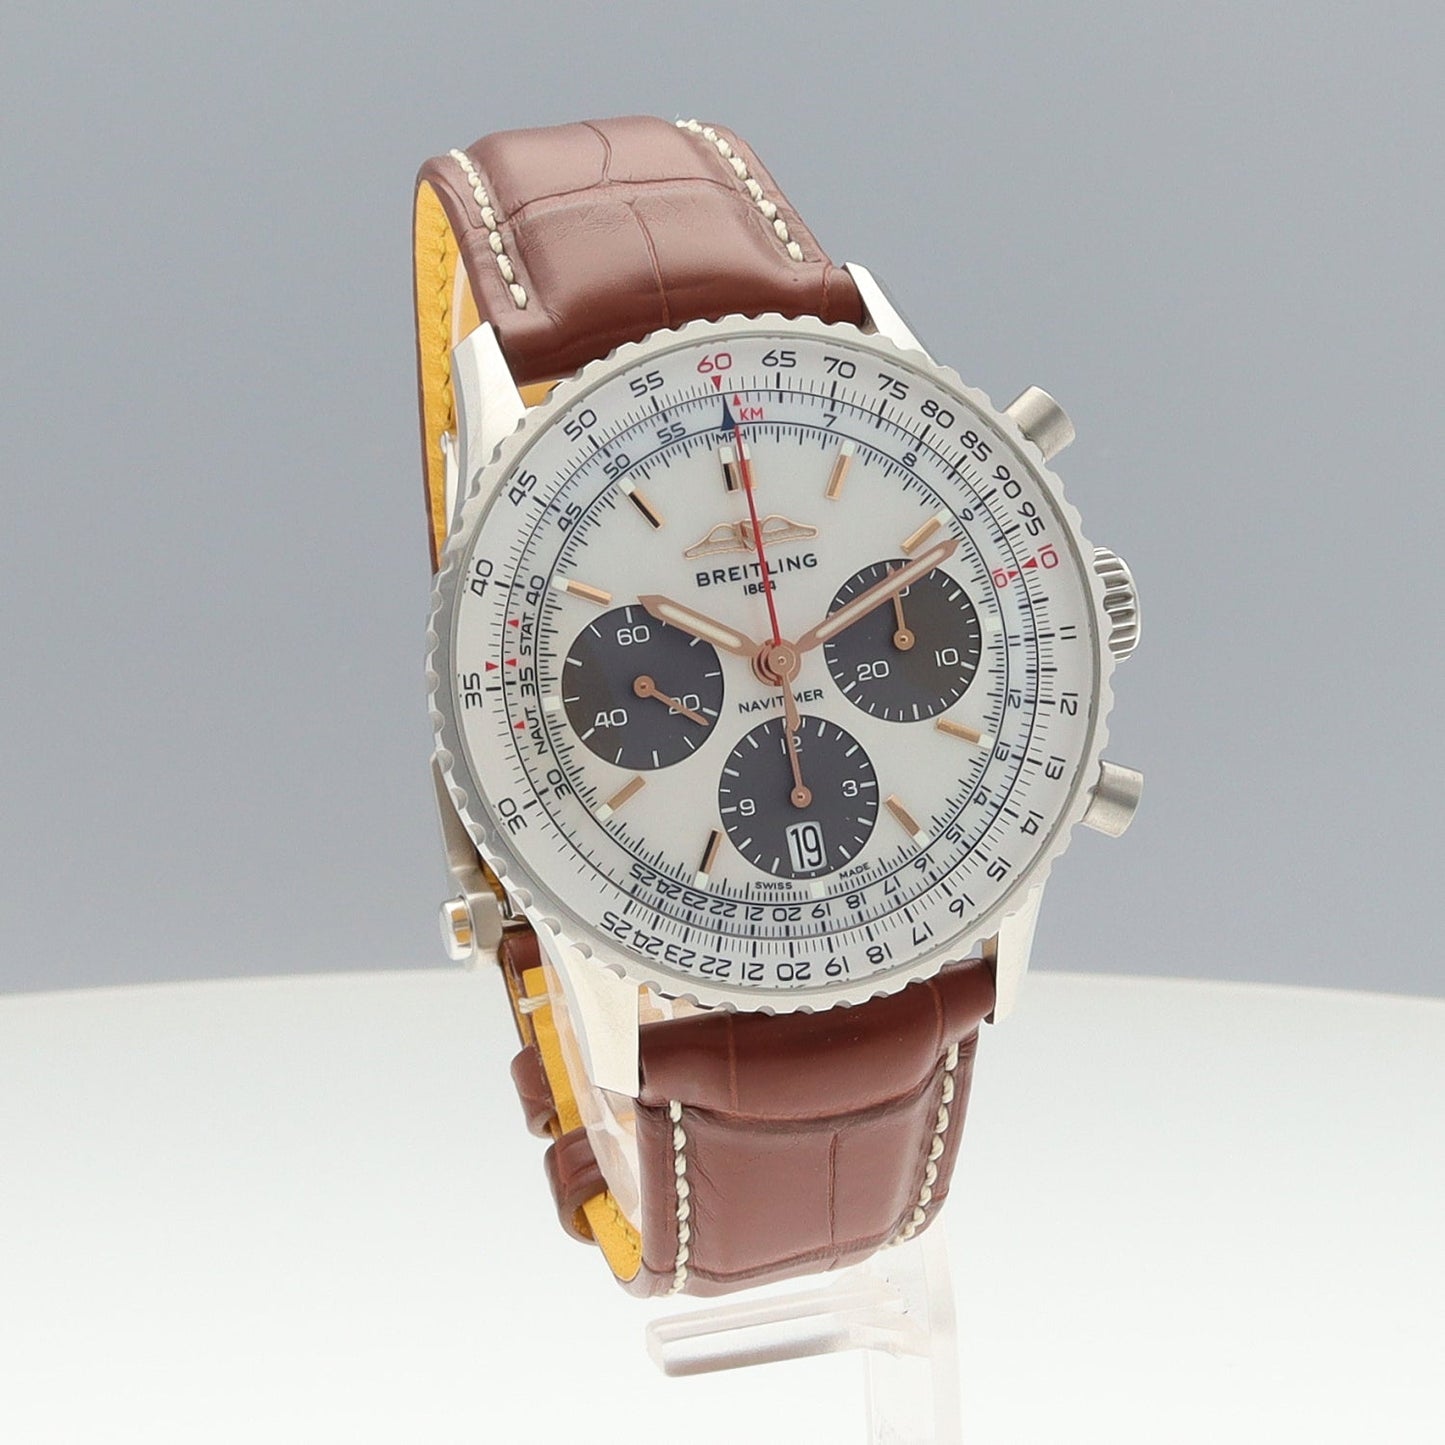 AB0139211A1P1　Navitimer B01 Limited to Japan　2BRT01-00190